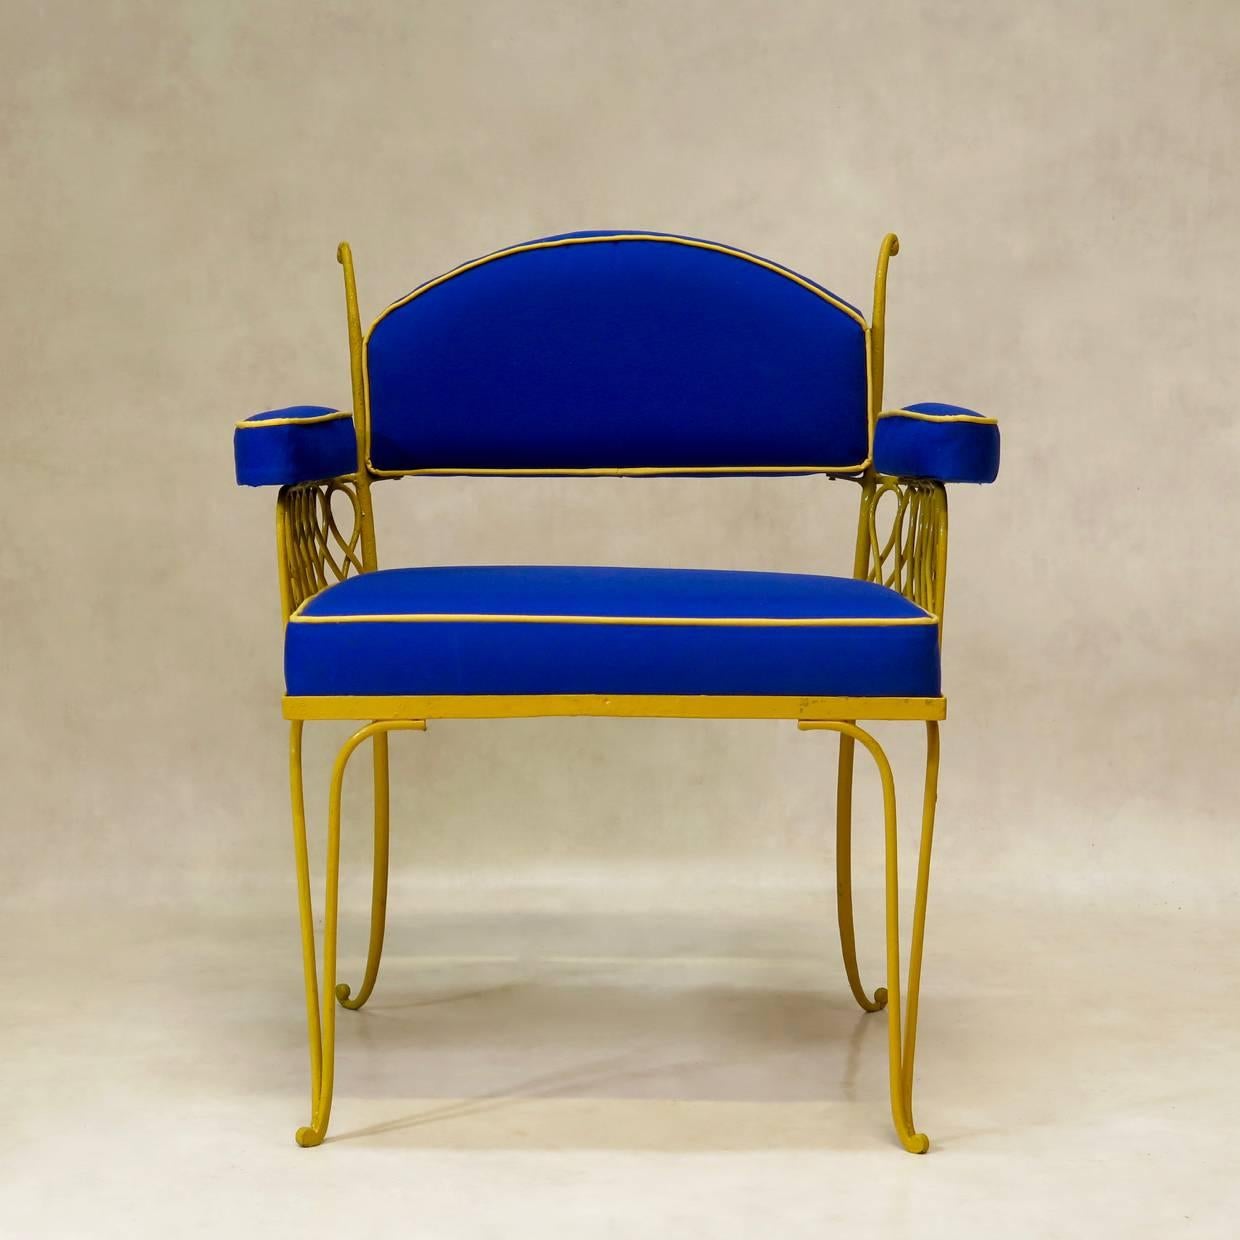 Chic and fun pair of Art Deco garden chairs by René Prou, with a yellow-painted wrought iron structure and newly-upholstered blue canvas seats, backs and armrests, with yellow piping.